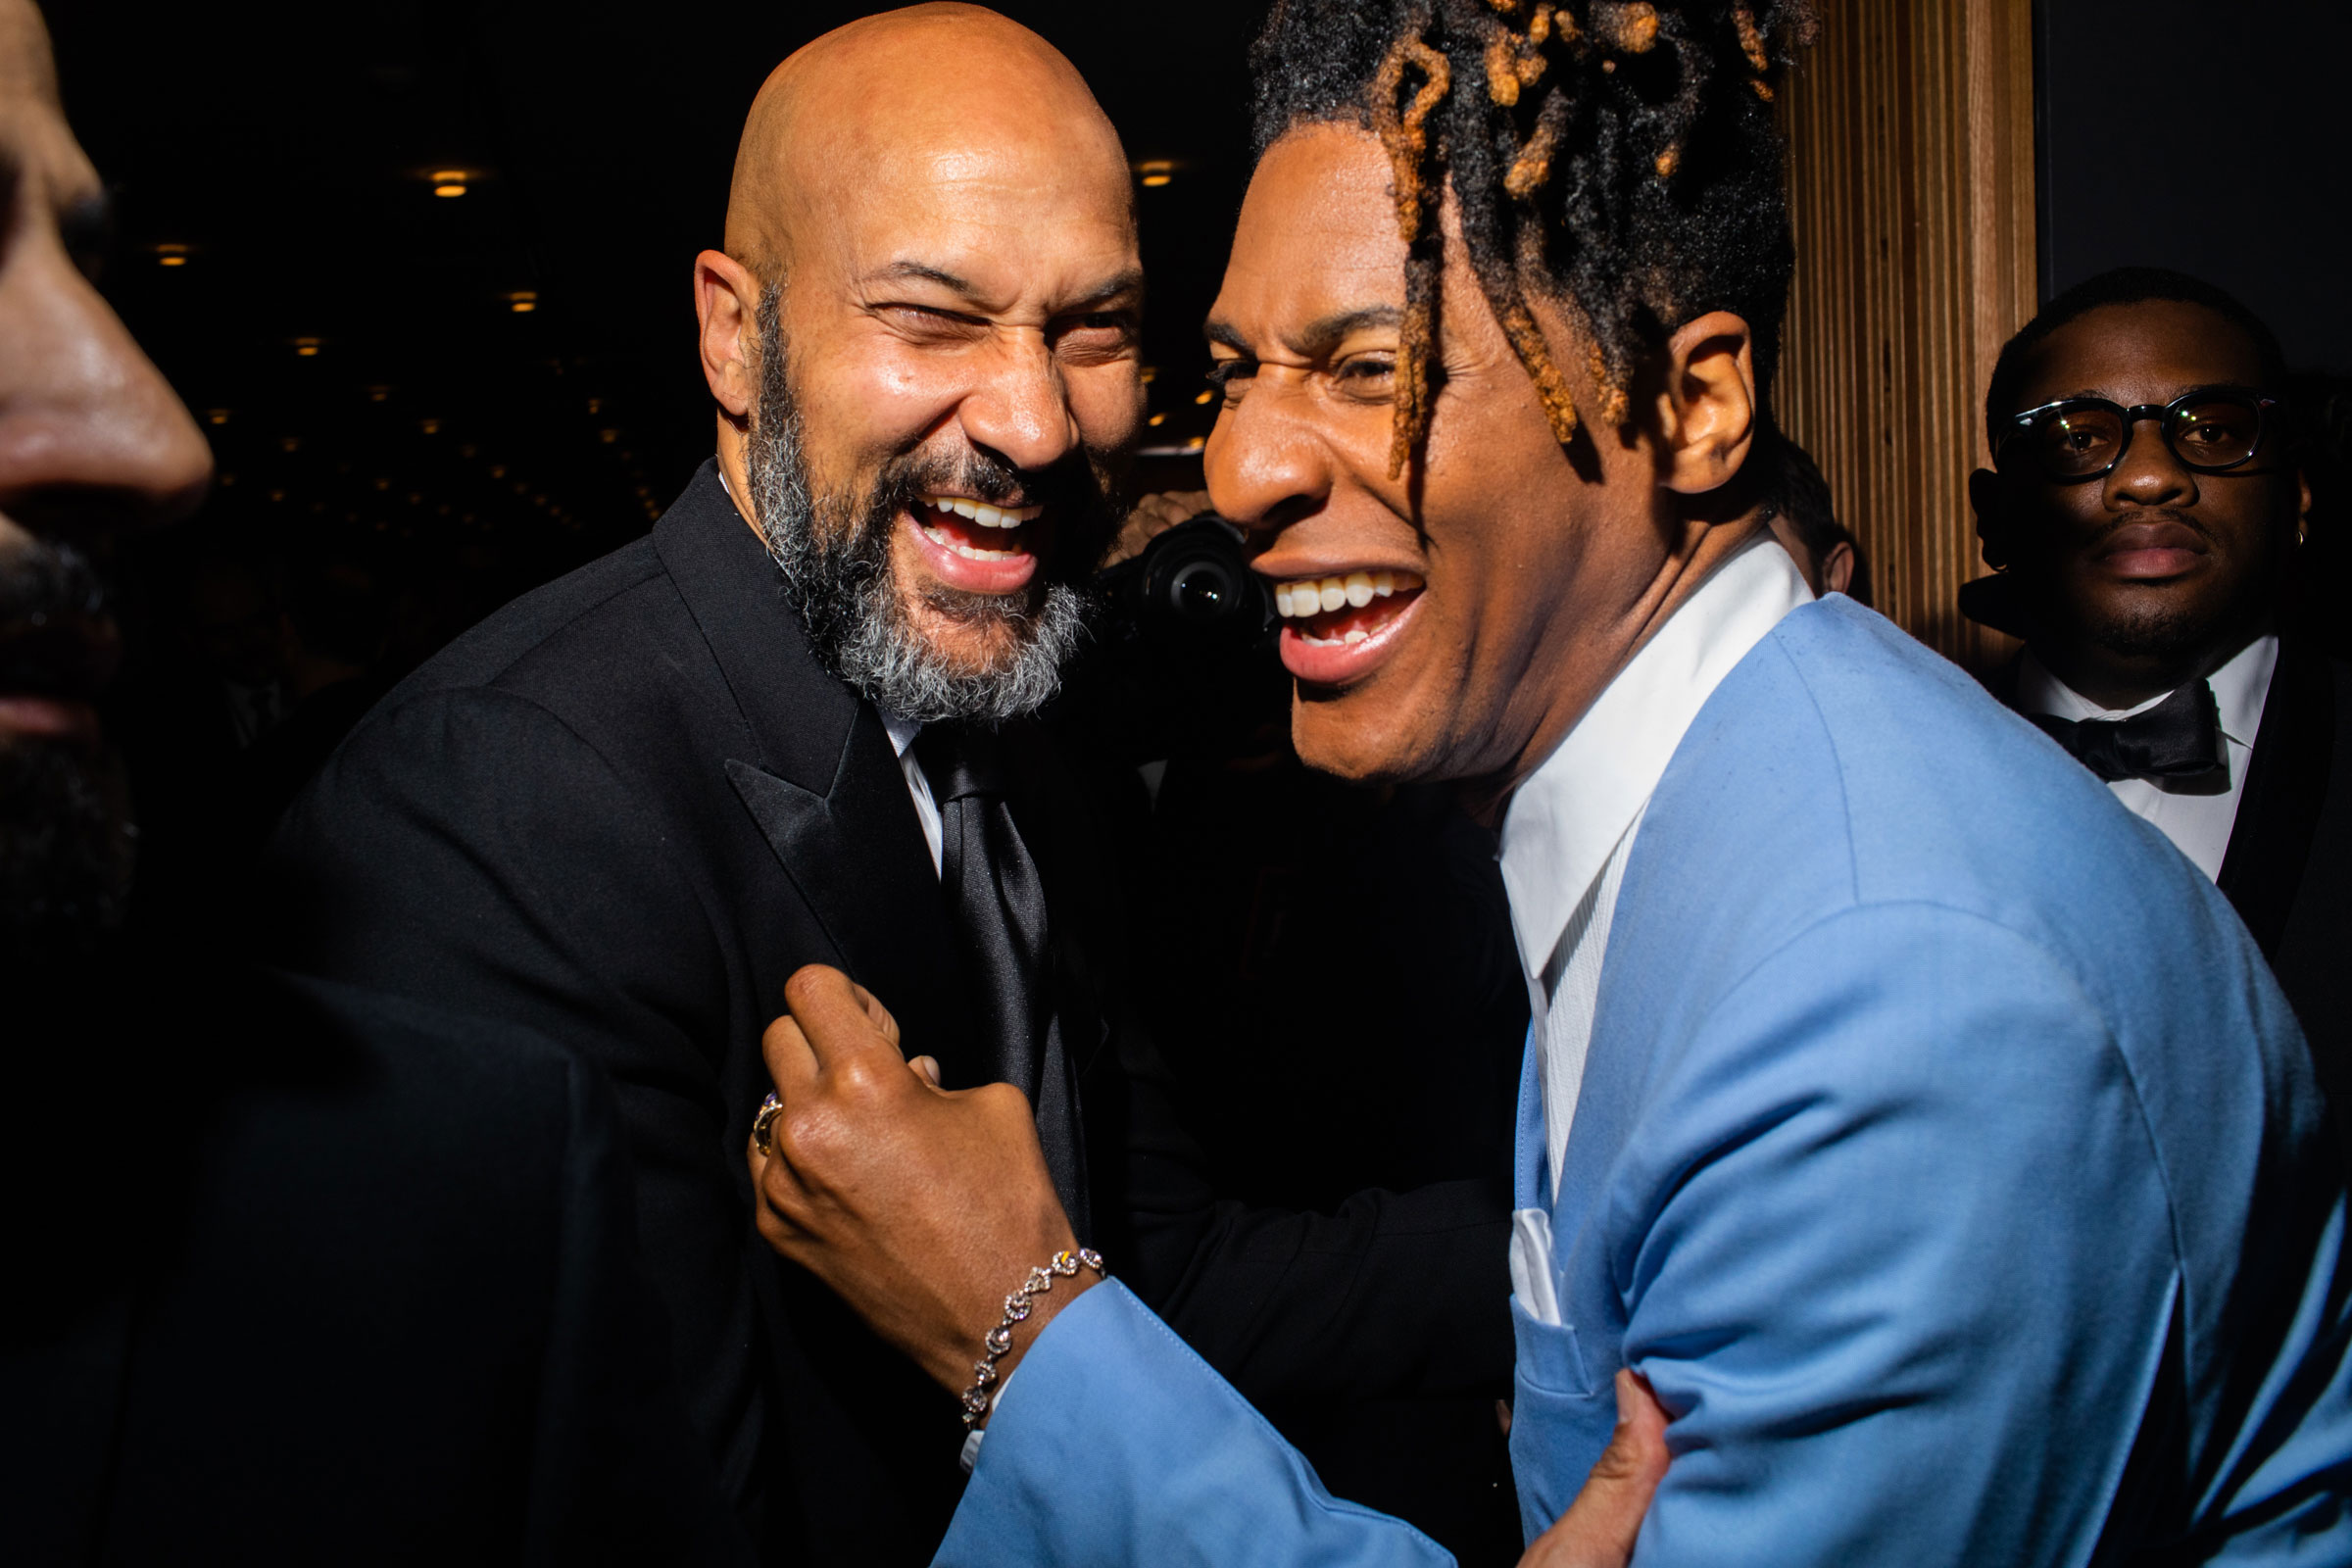 Keegan-Michael Key and Jon Batiste at the TIME 100 Gala at Jazz at Lincoln Center in New York City, on April 26, 2023. (Landon Nordeman for TIME)